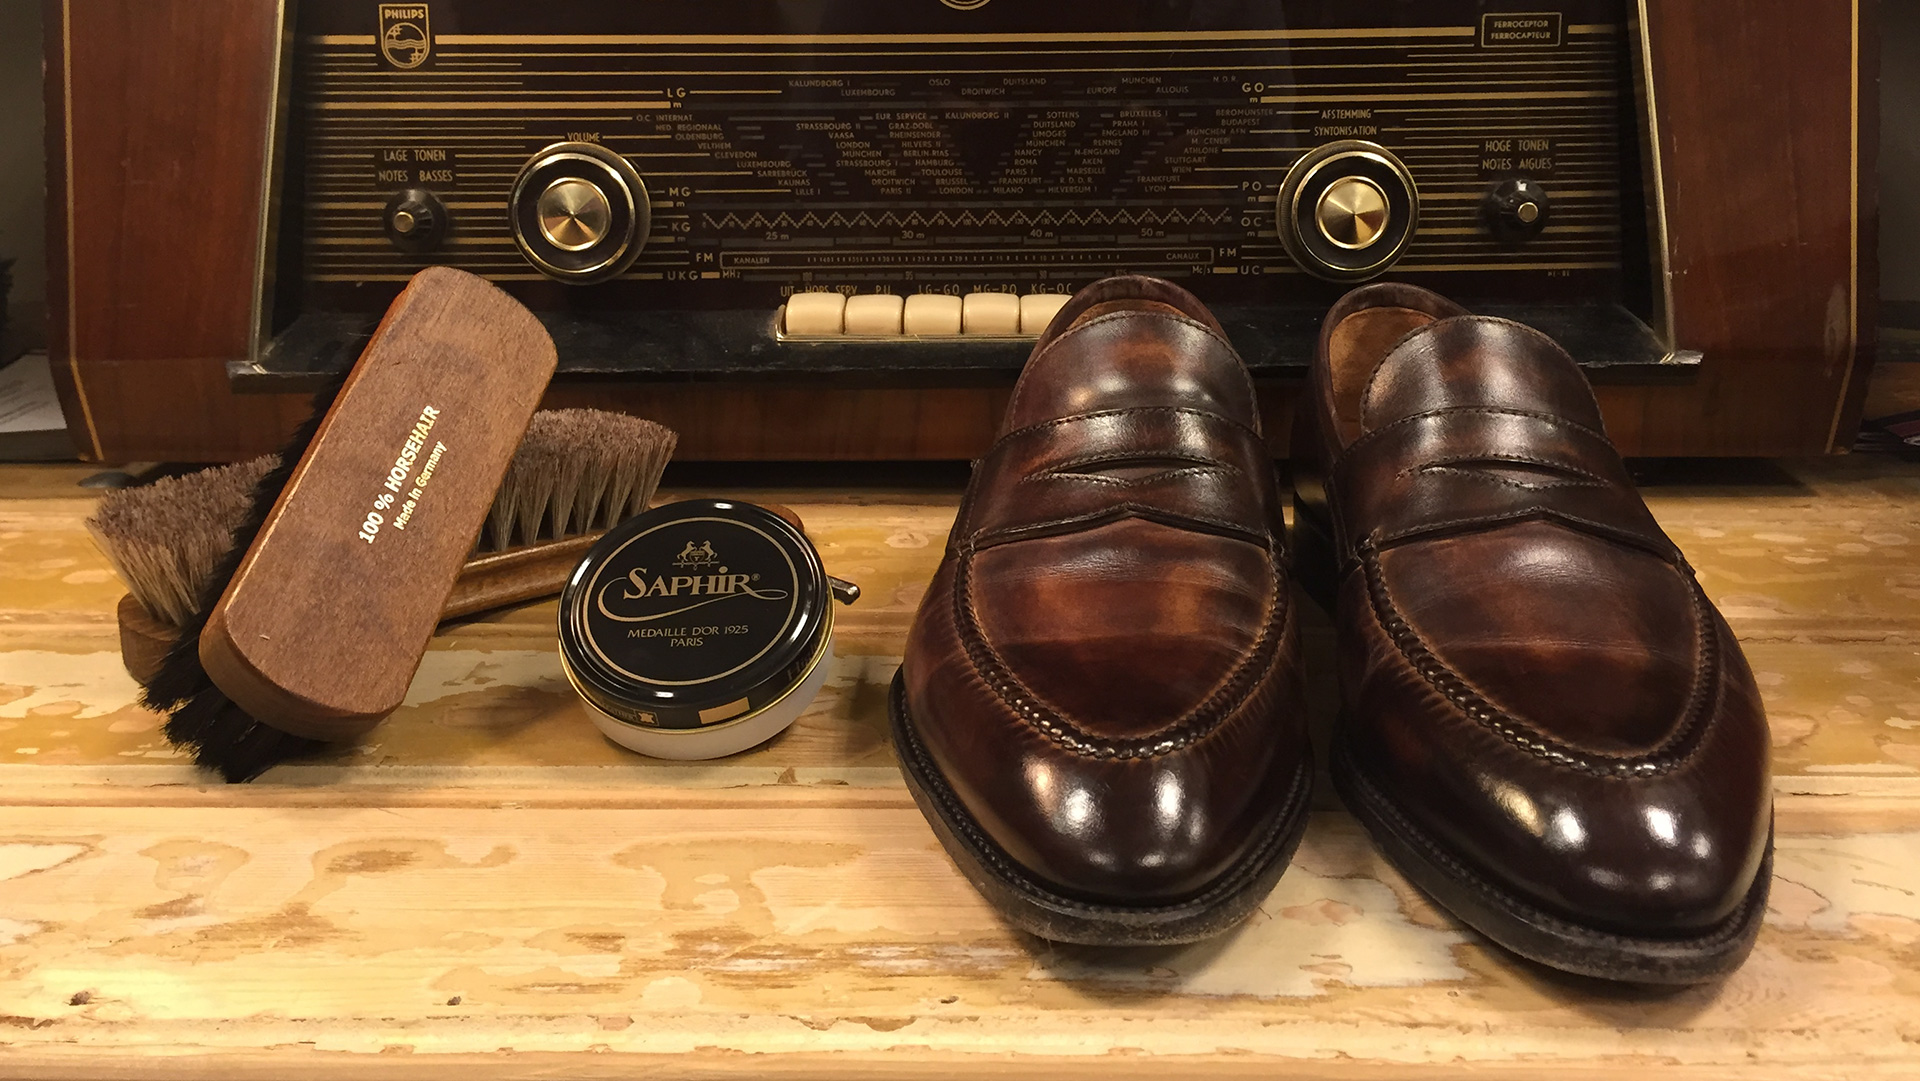 How to mirror shine your leather shoes 